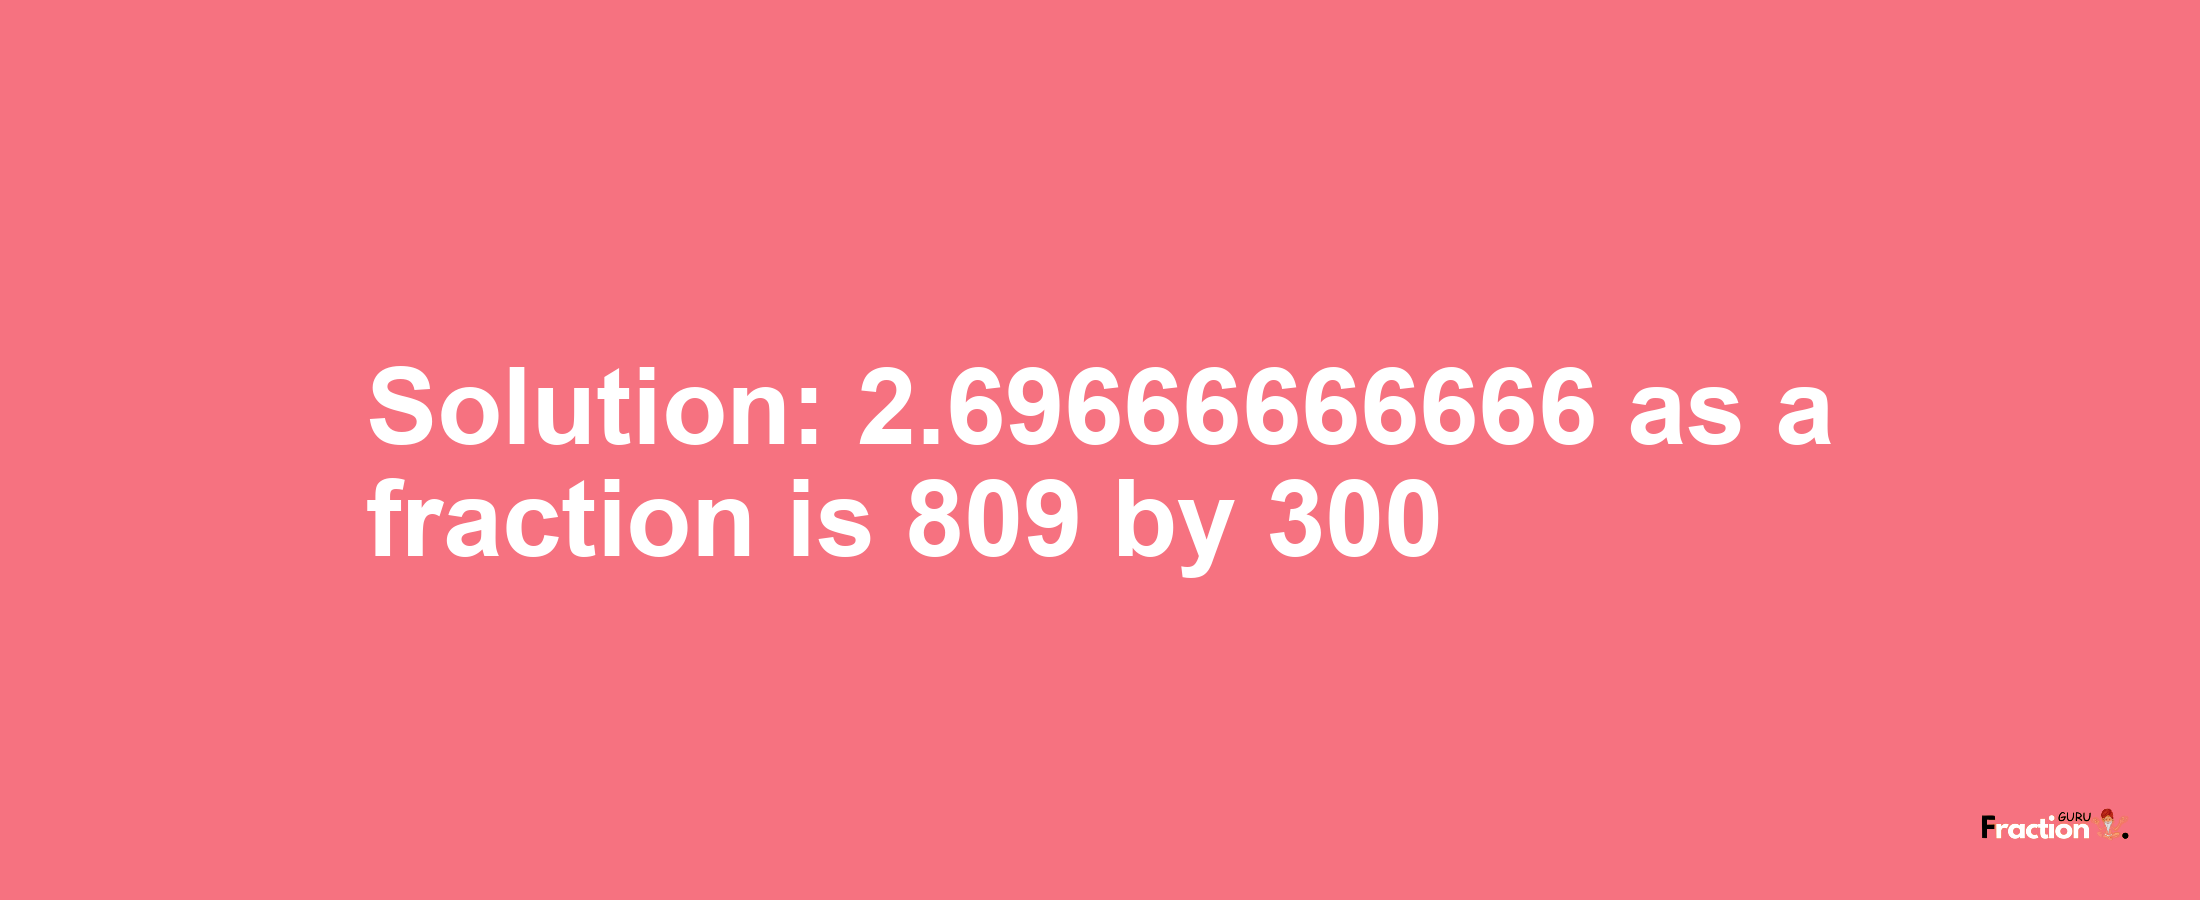 Solution:2.69666666666 as a fraction is 809/300